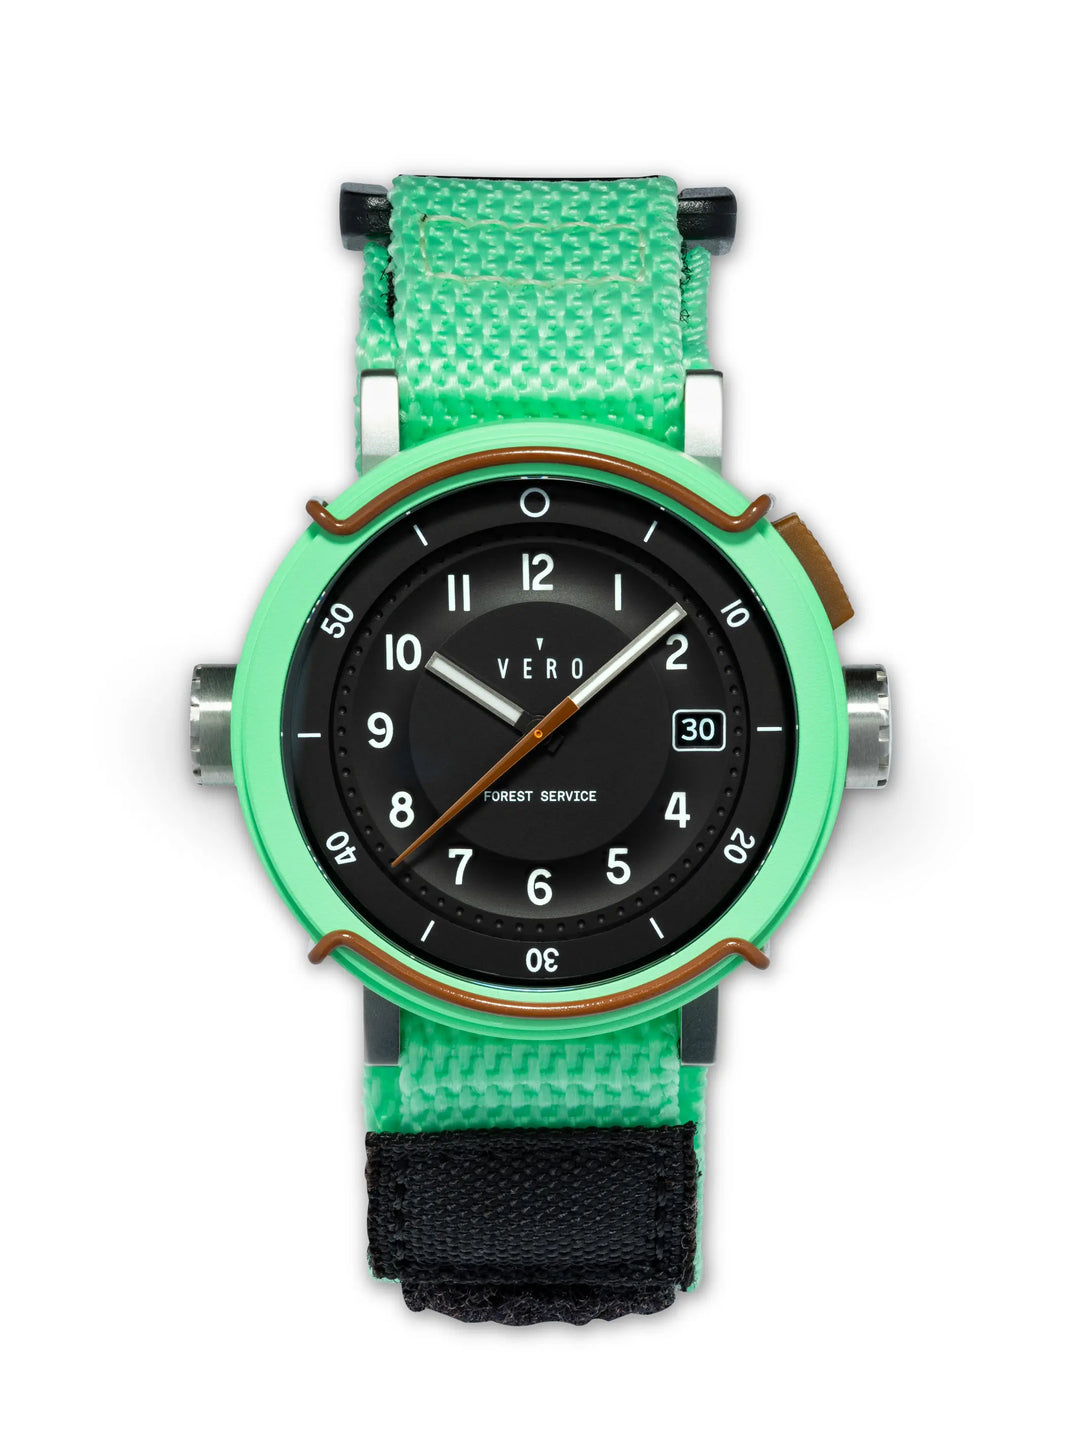 VERO Watches  Modern Adventure Watches Inspired by Nature – VERO Watch  Company